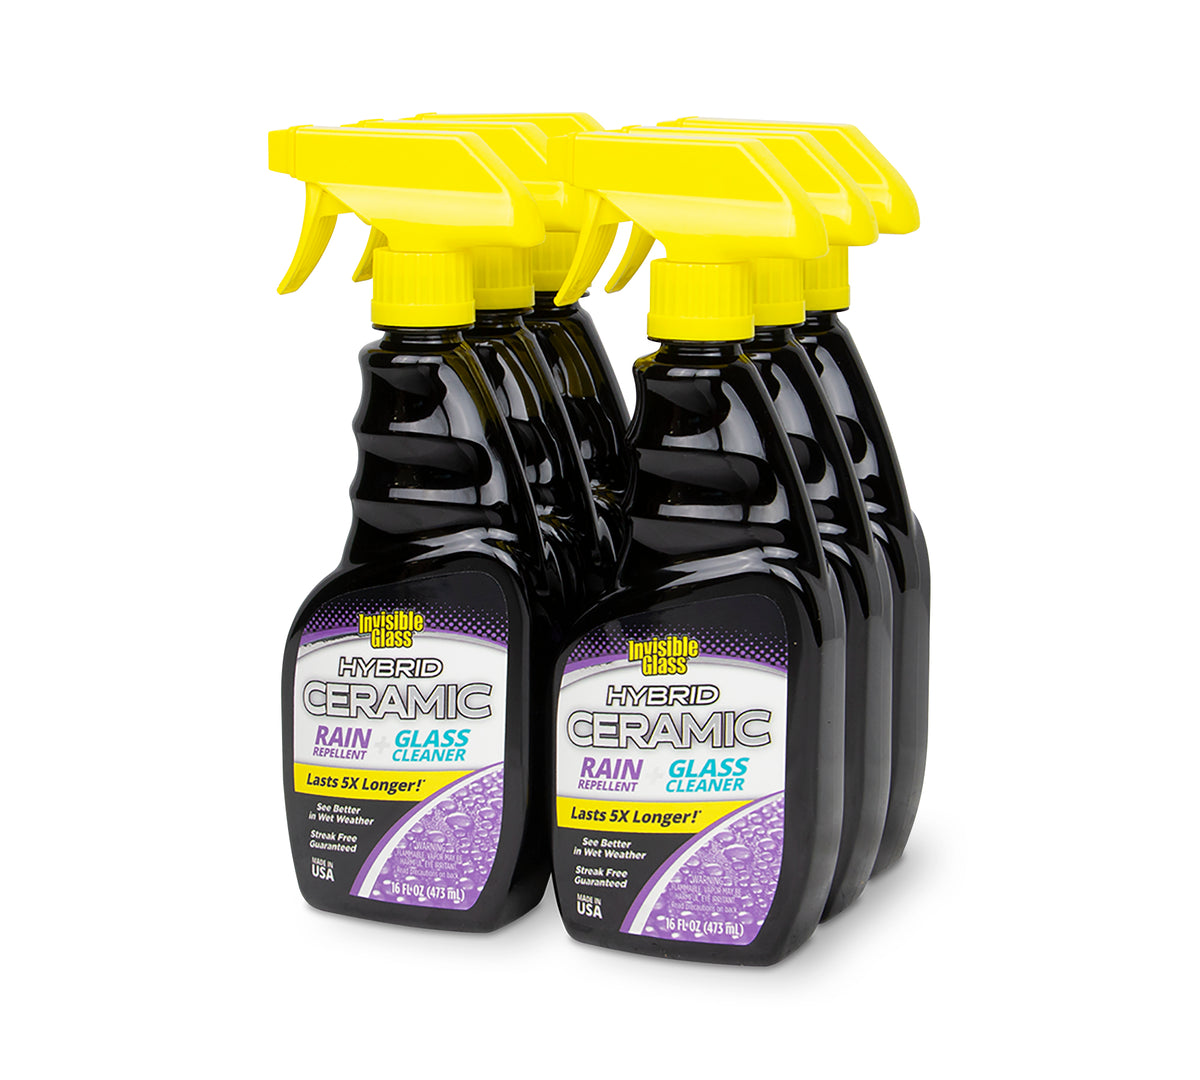 Stoner Car Care Invisible Glass Premium Glass Cleaner and Window